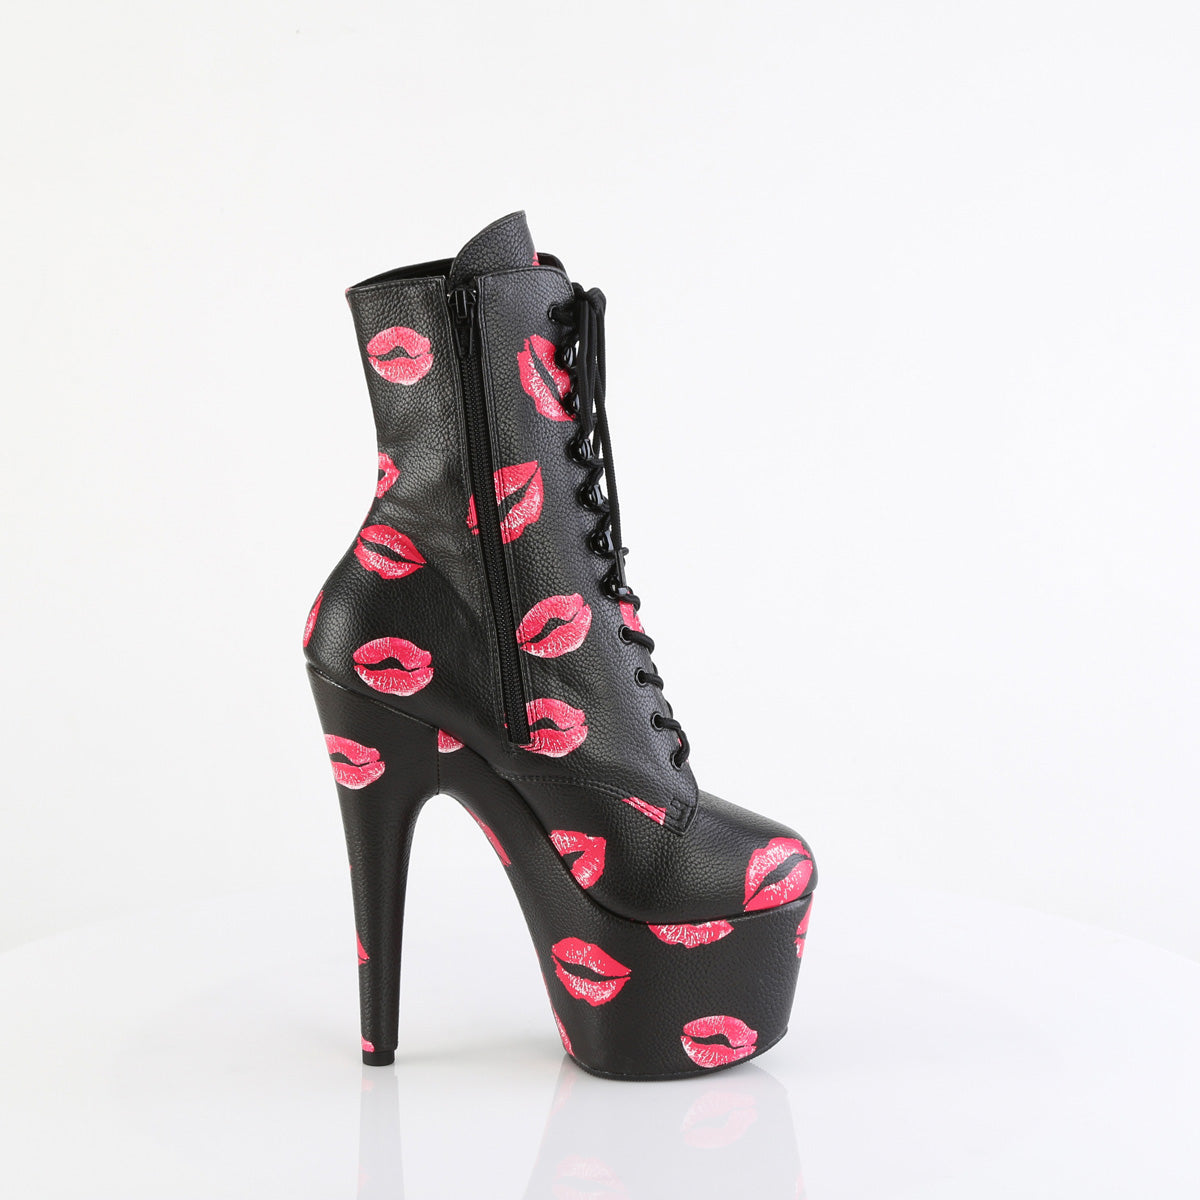 ADORE-1020KISSES Black Pleaser Pole Dancing Mean Girl Ankle Boots